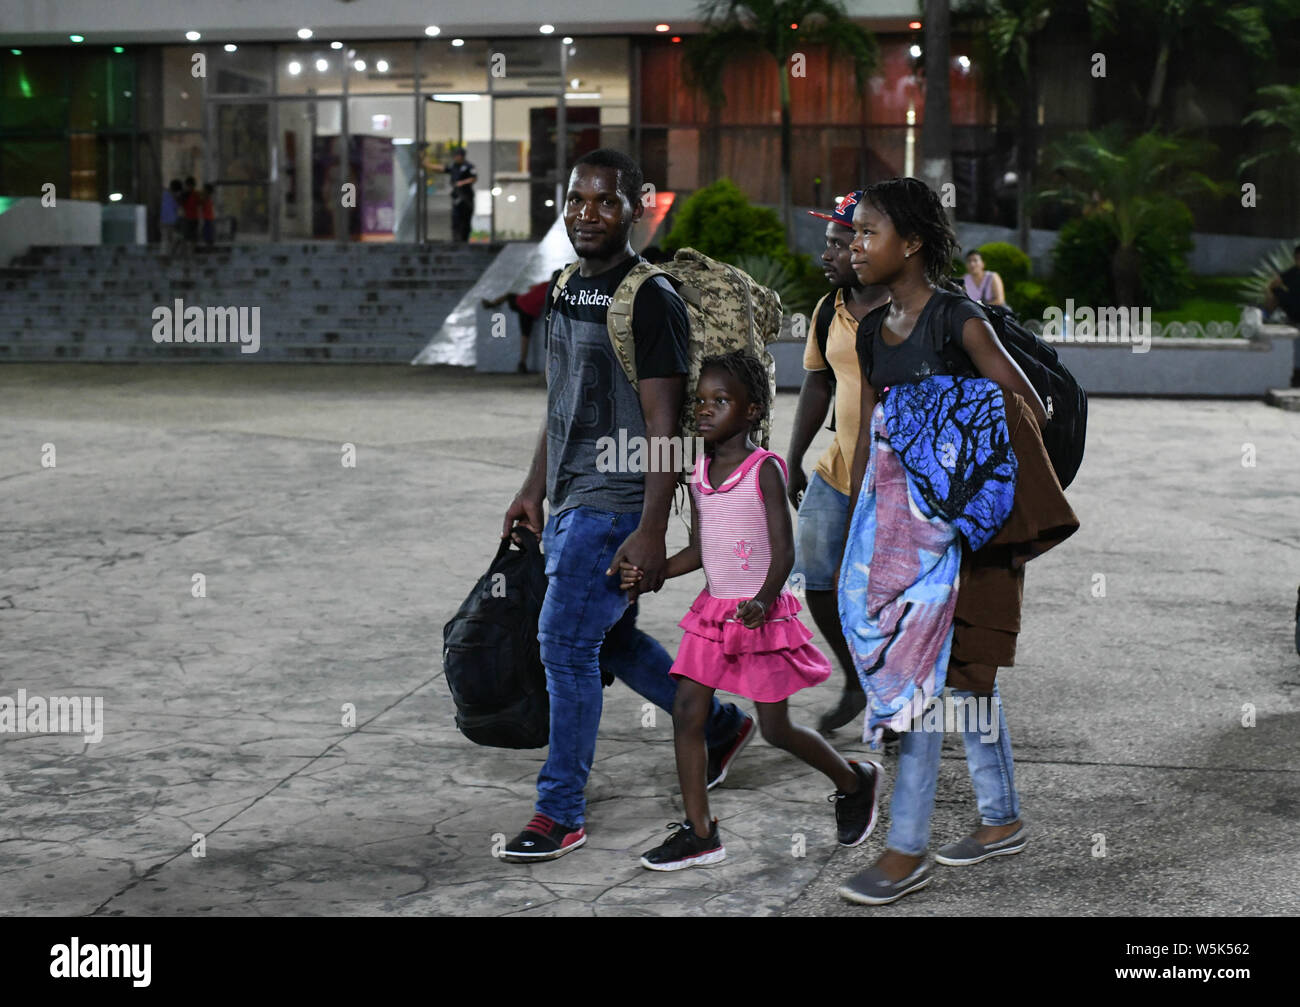 July 26, 2019, Tapachula, Chiapas, Mexico: The new global melting pot: a family from Cameroon walks accross main plaza, founding father Miguel Hidalgo in downtown Tapachula, as two Bangladeshi migrants. Mexico has witnessed an increase of migrants crossing the country to reach the US, and now hundreds wander the streets of this southern Mexican city, which is becoming one more new global melting pot. Credit: Miguel Juarez Lugo/ZUMA Wire/Alamy Live News Stock Photo